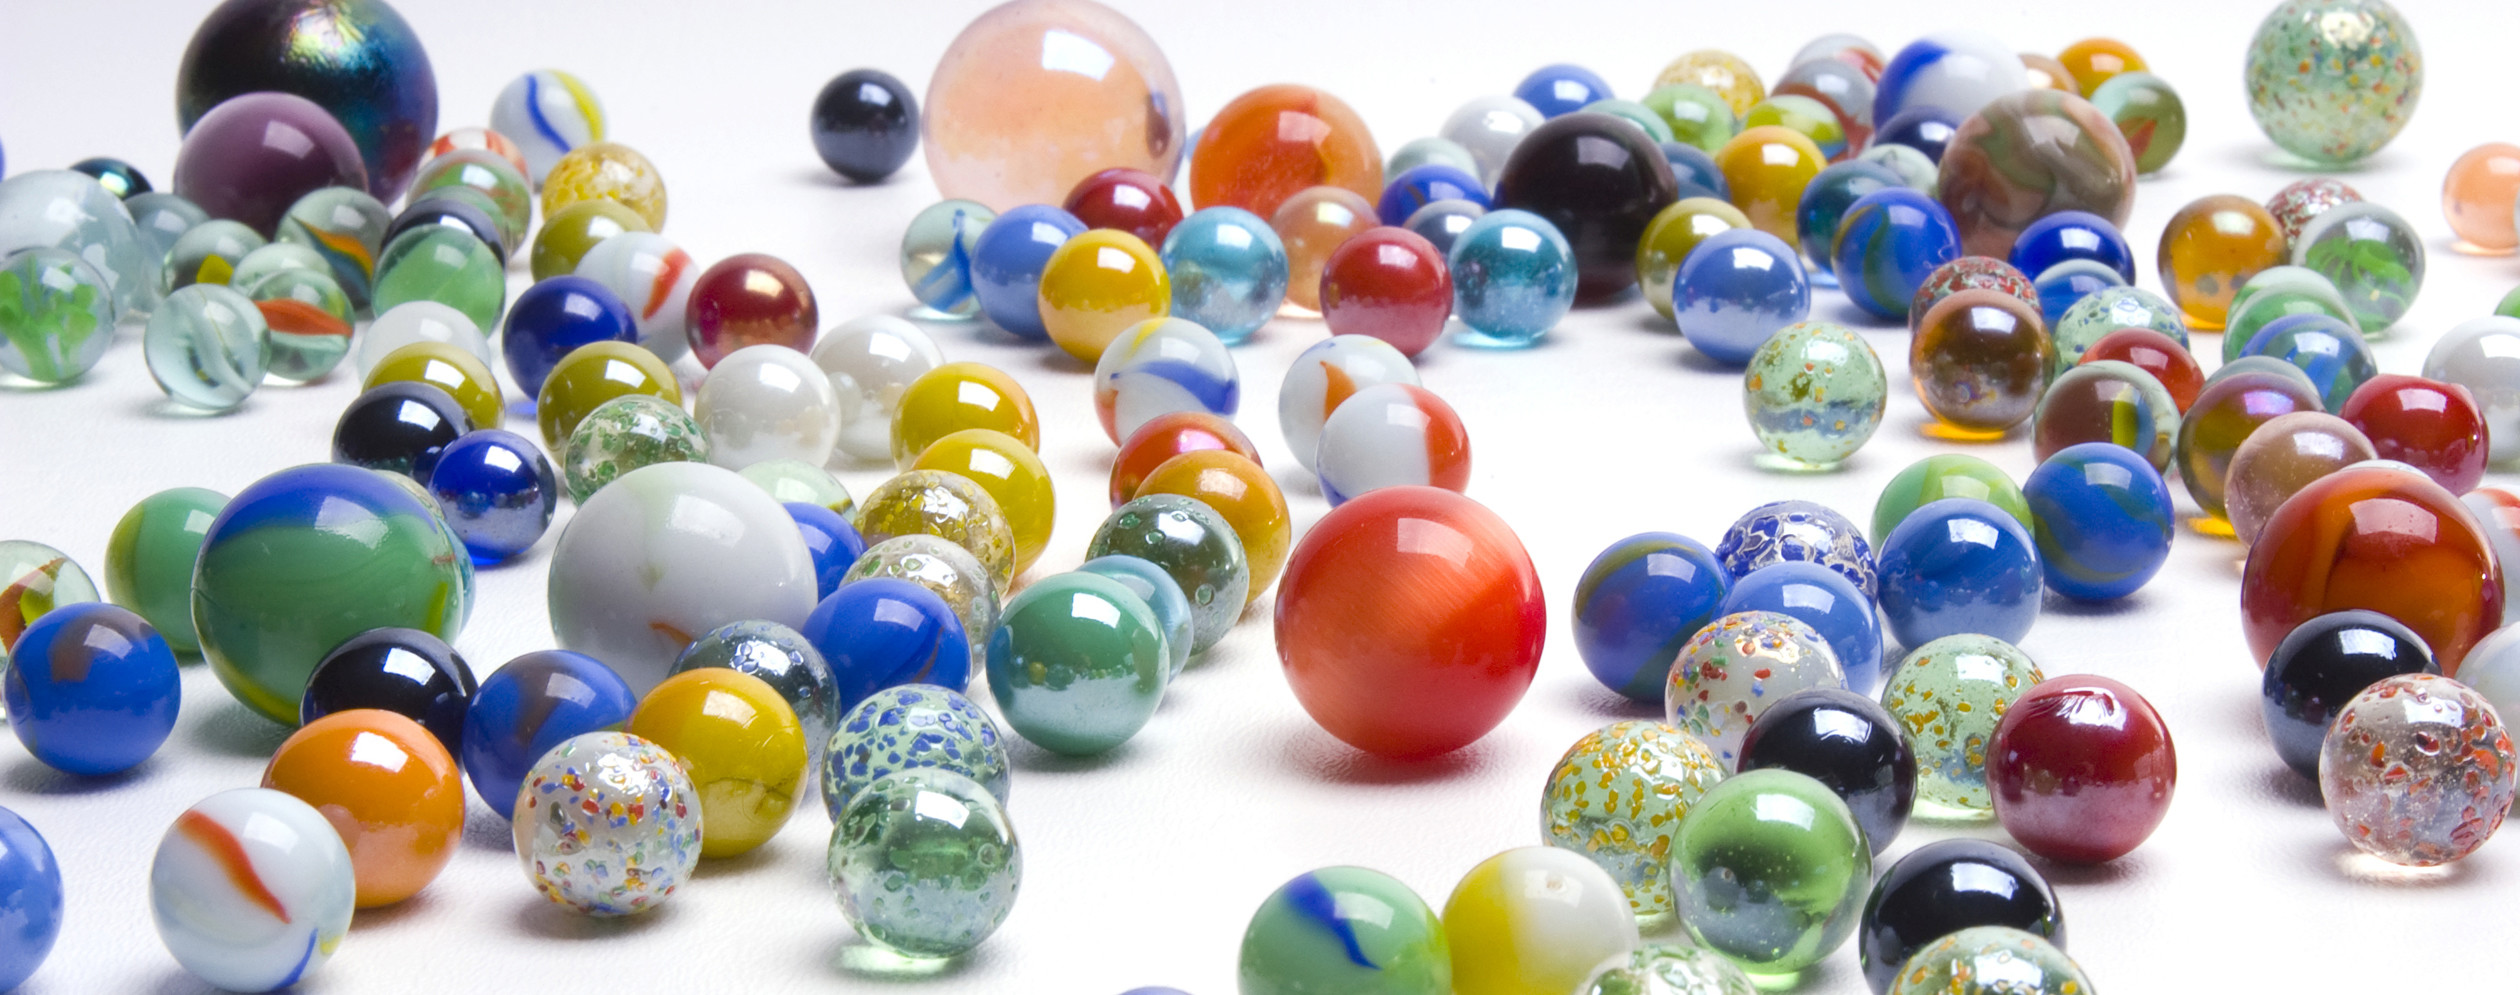 Marbles Home - themarblesstore.com